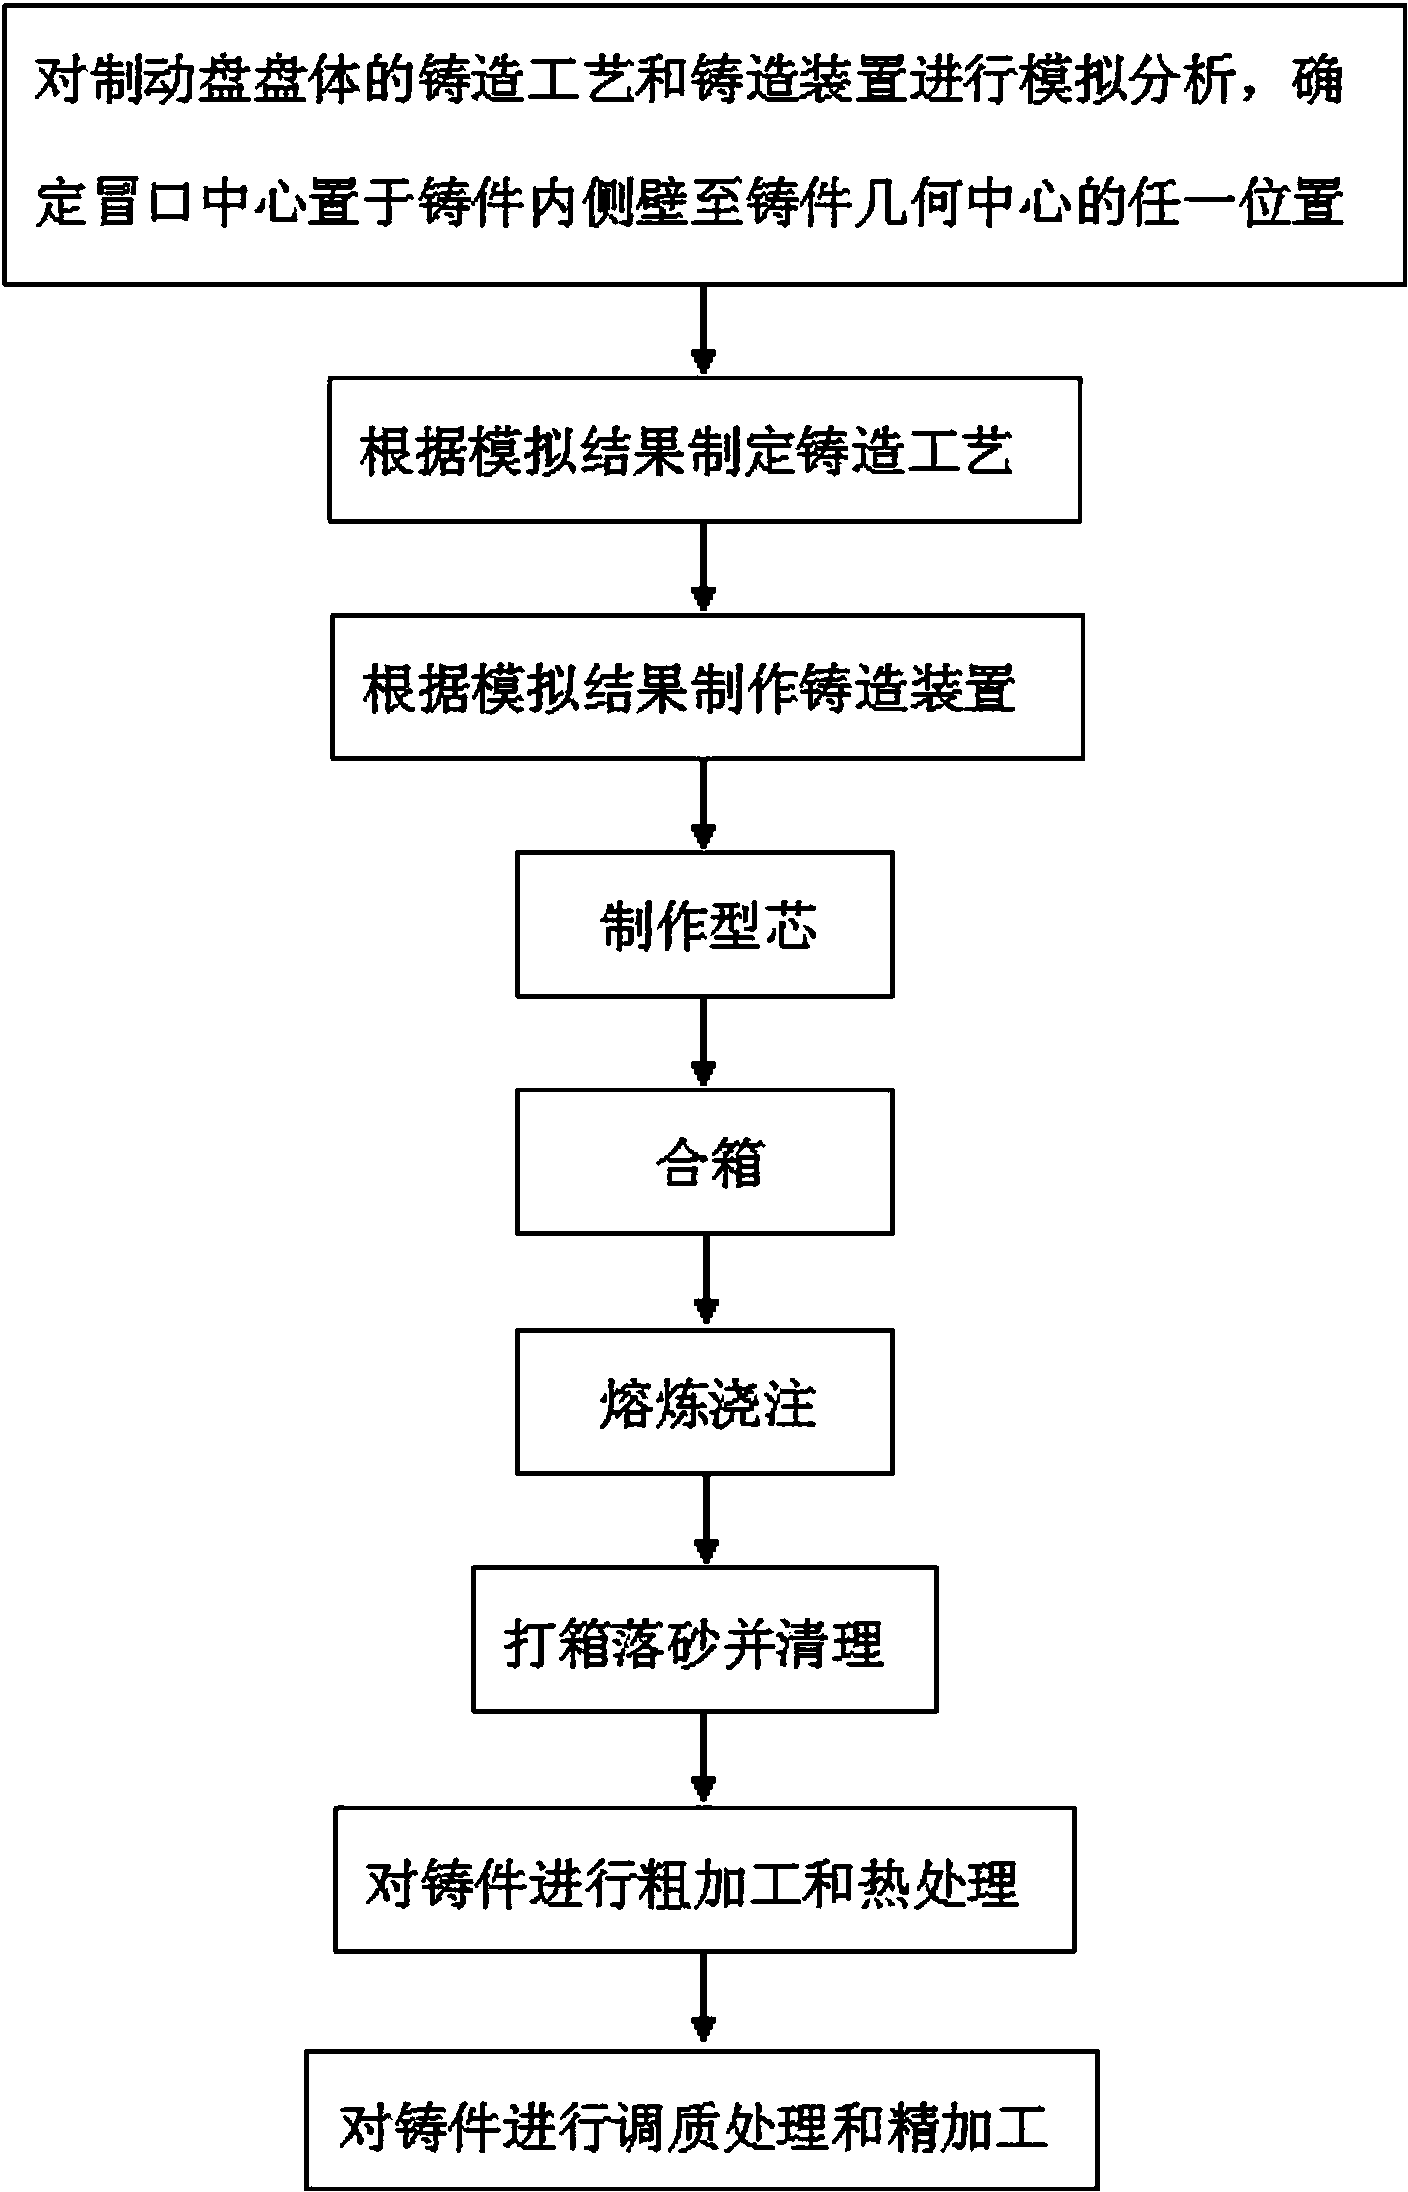 Brake disc body and casting method and device for manufacturing same